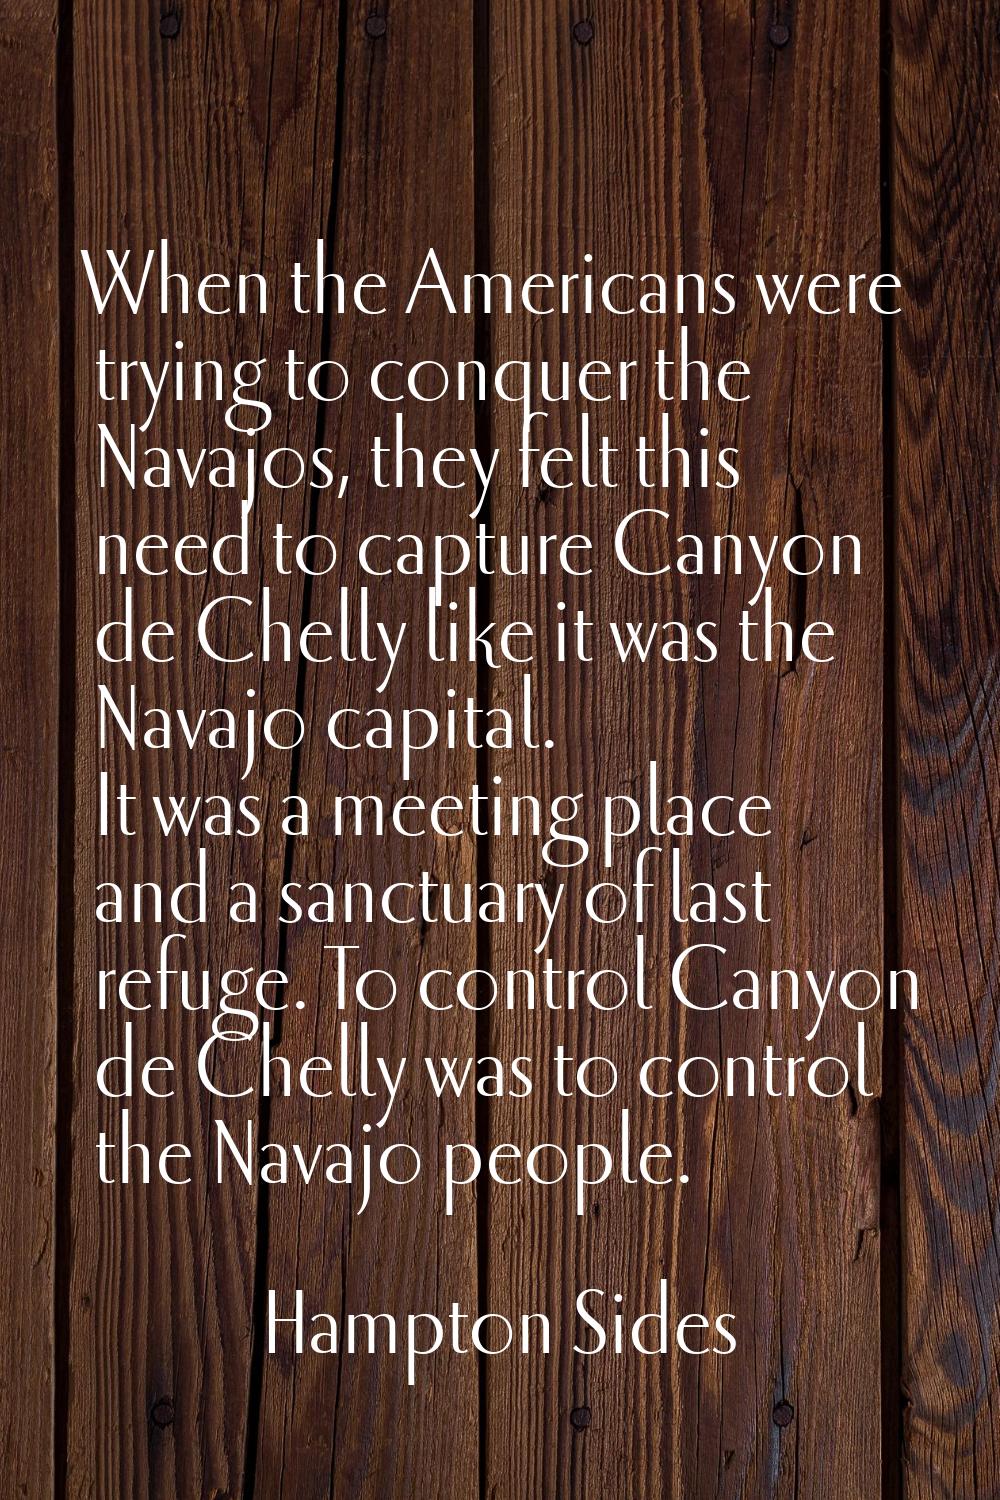 When the Americans were trying to conquer the Navajos, they felt this need to capture Canyon de Che